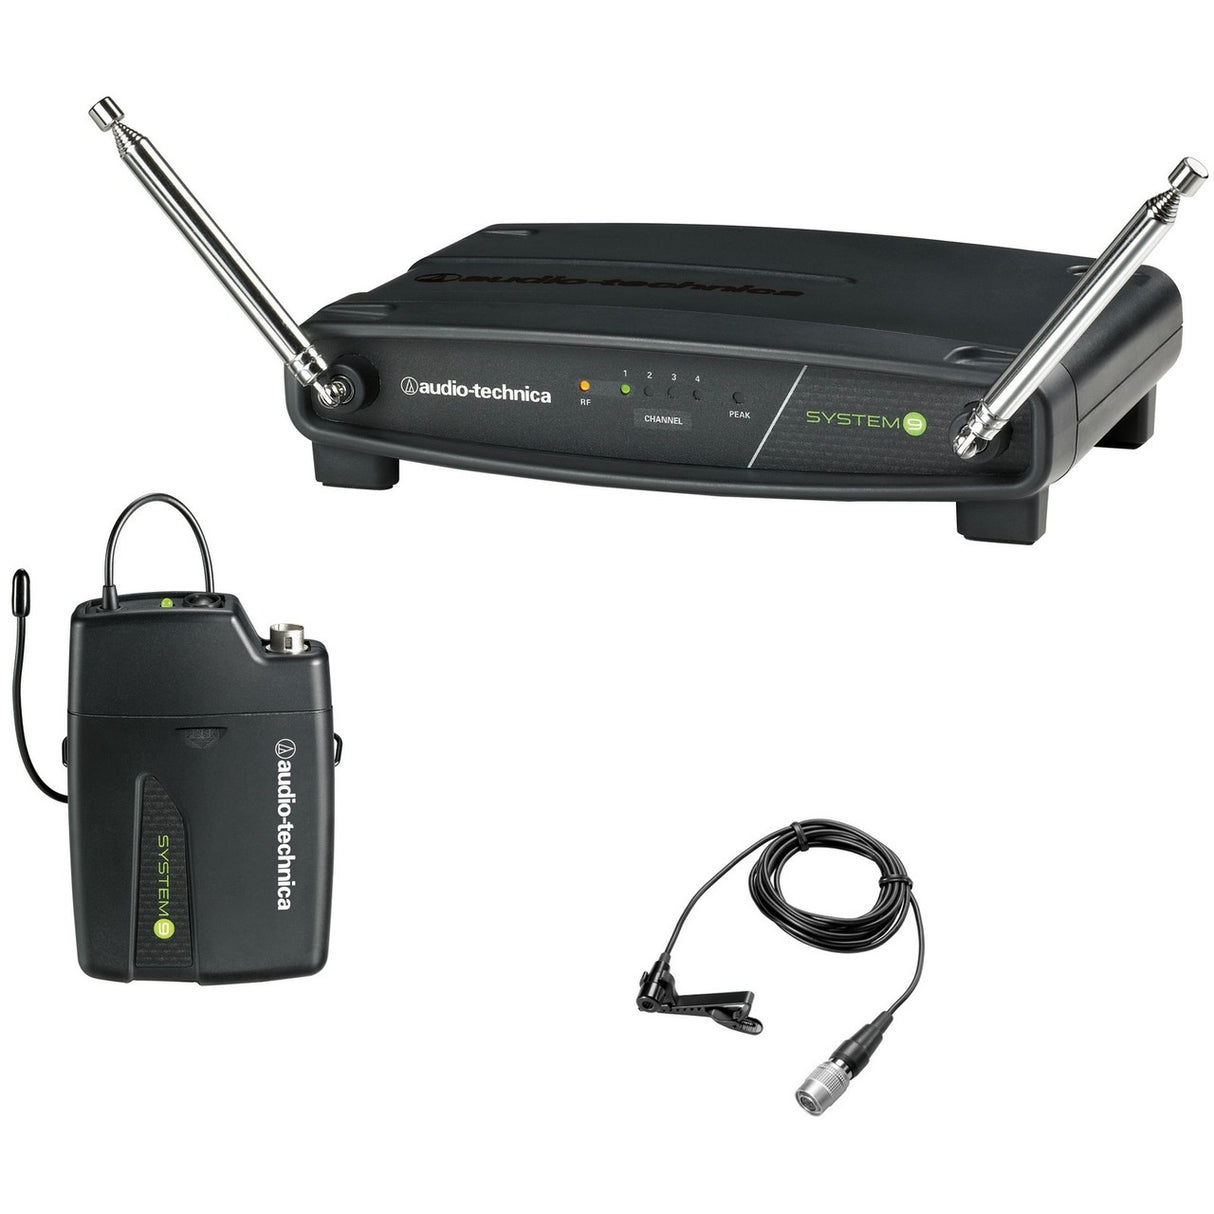 Audio Technica ATW-901a/L | System 9 VHF Wireless System with Omnidirectional Lavalier Microphone